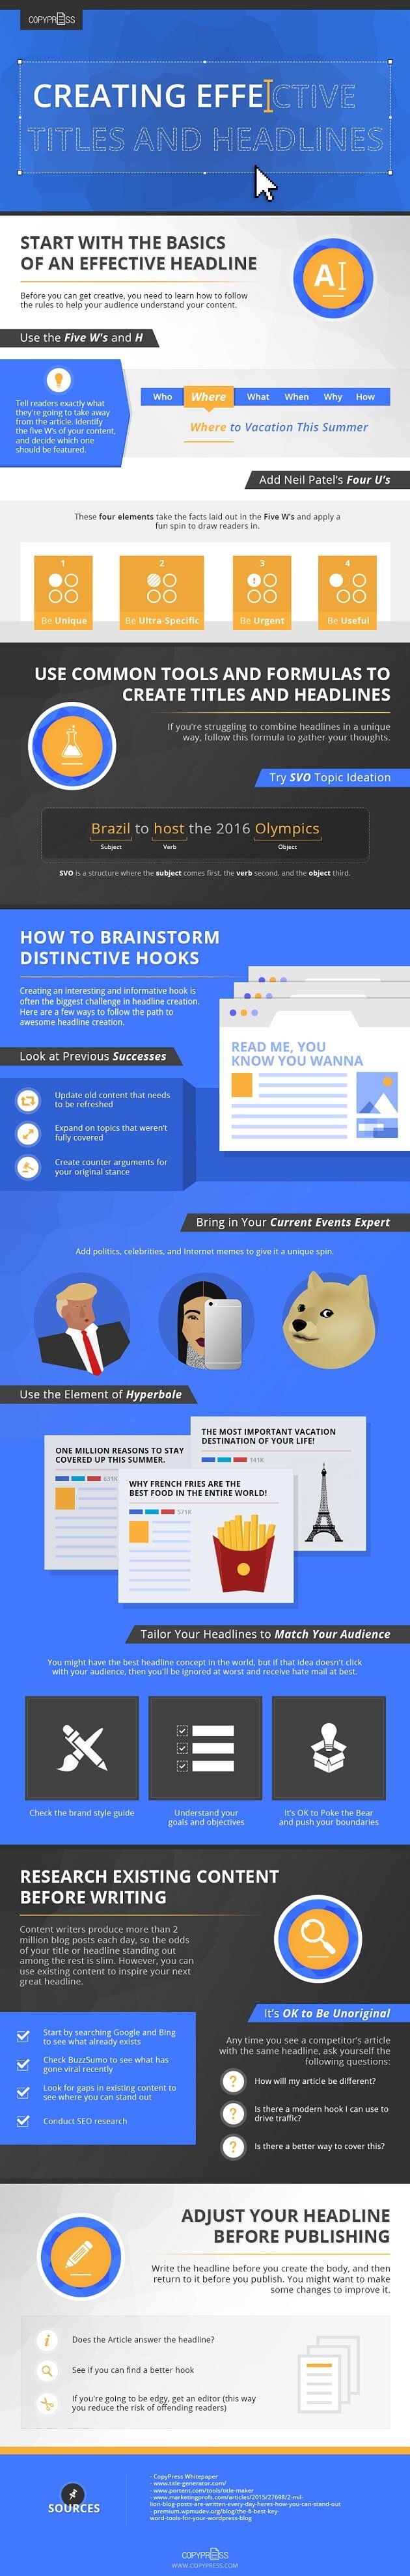 161018-how-to-write-headings-and-subject-lines-infographic-preview